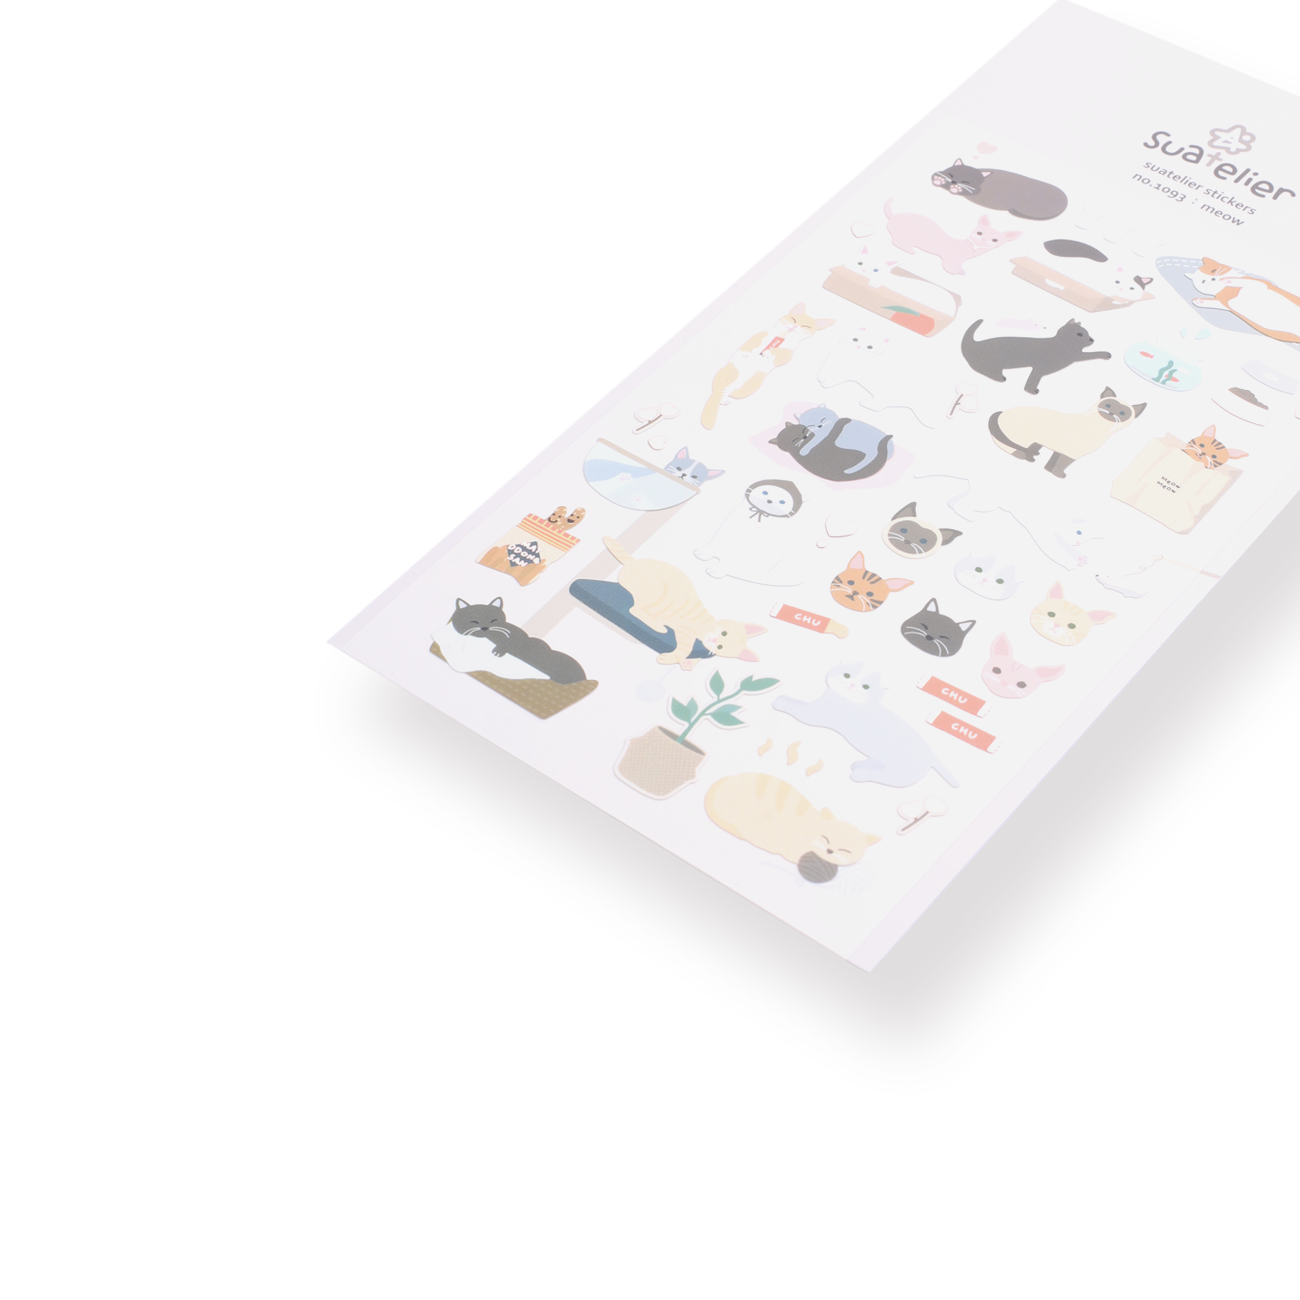 Suatelier Meow Stickers - Stationery Pal